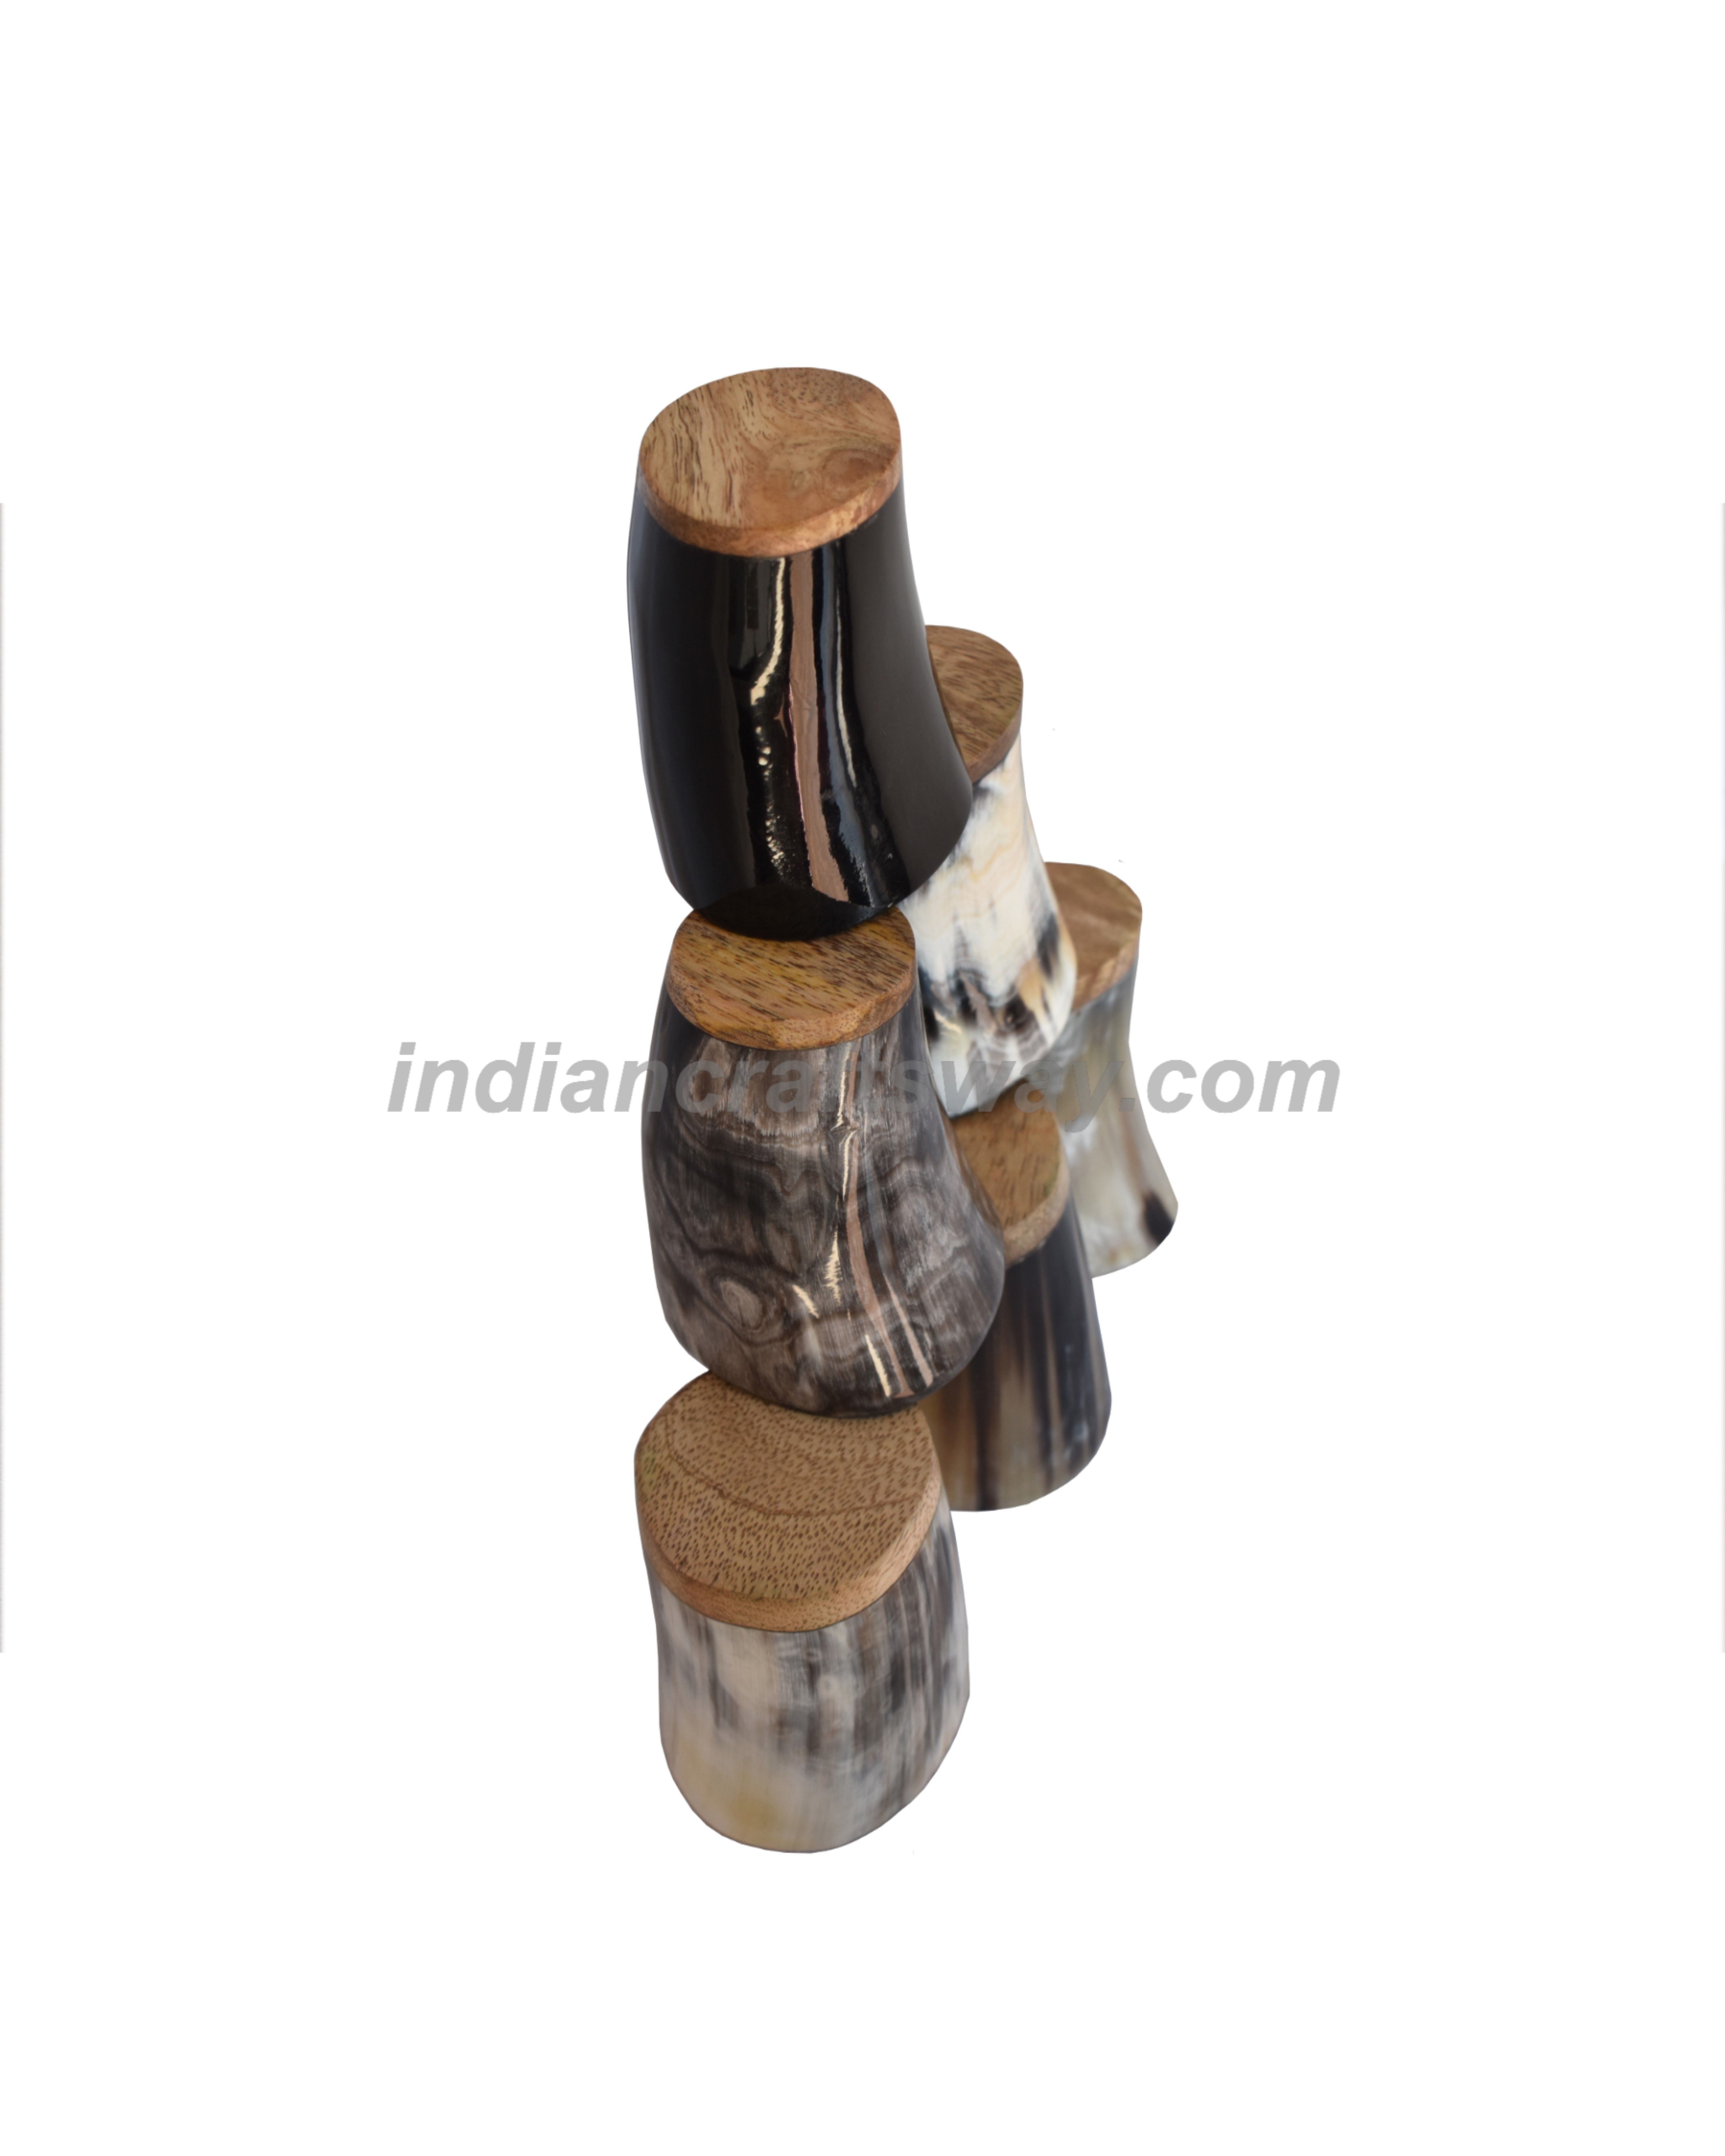 Drinking Horn Cup With Wooden Base